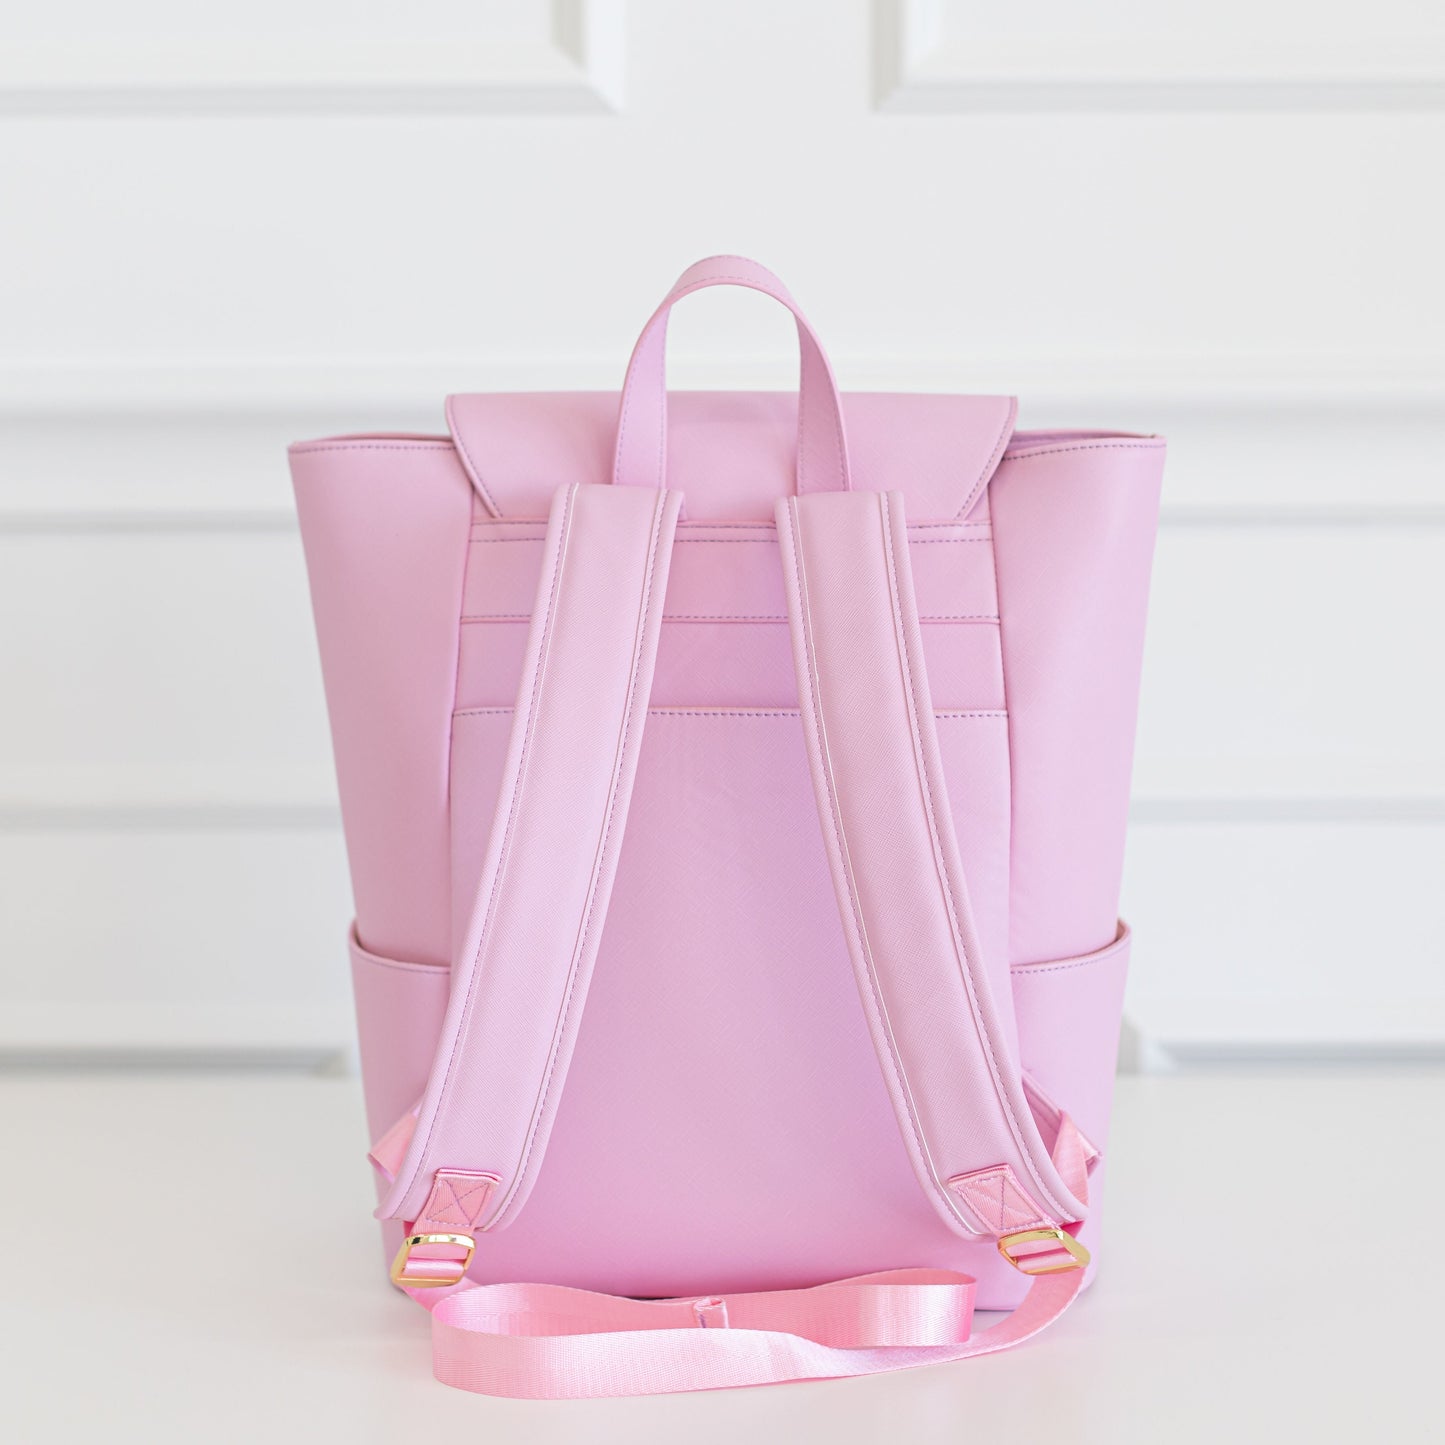 Pixie Pink Frilly Backpack